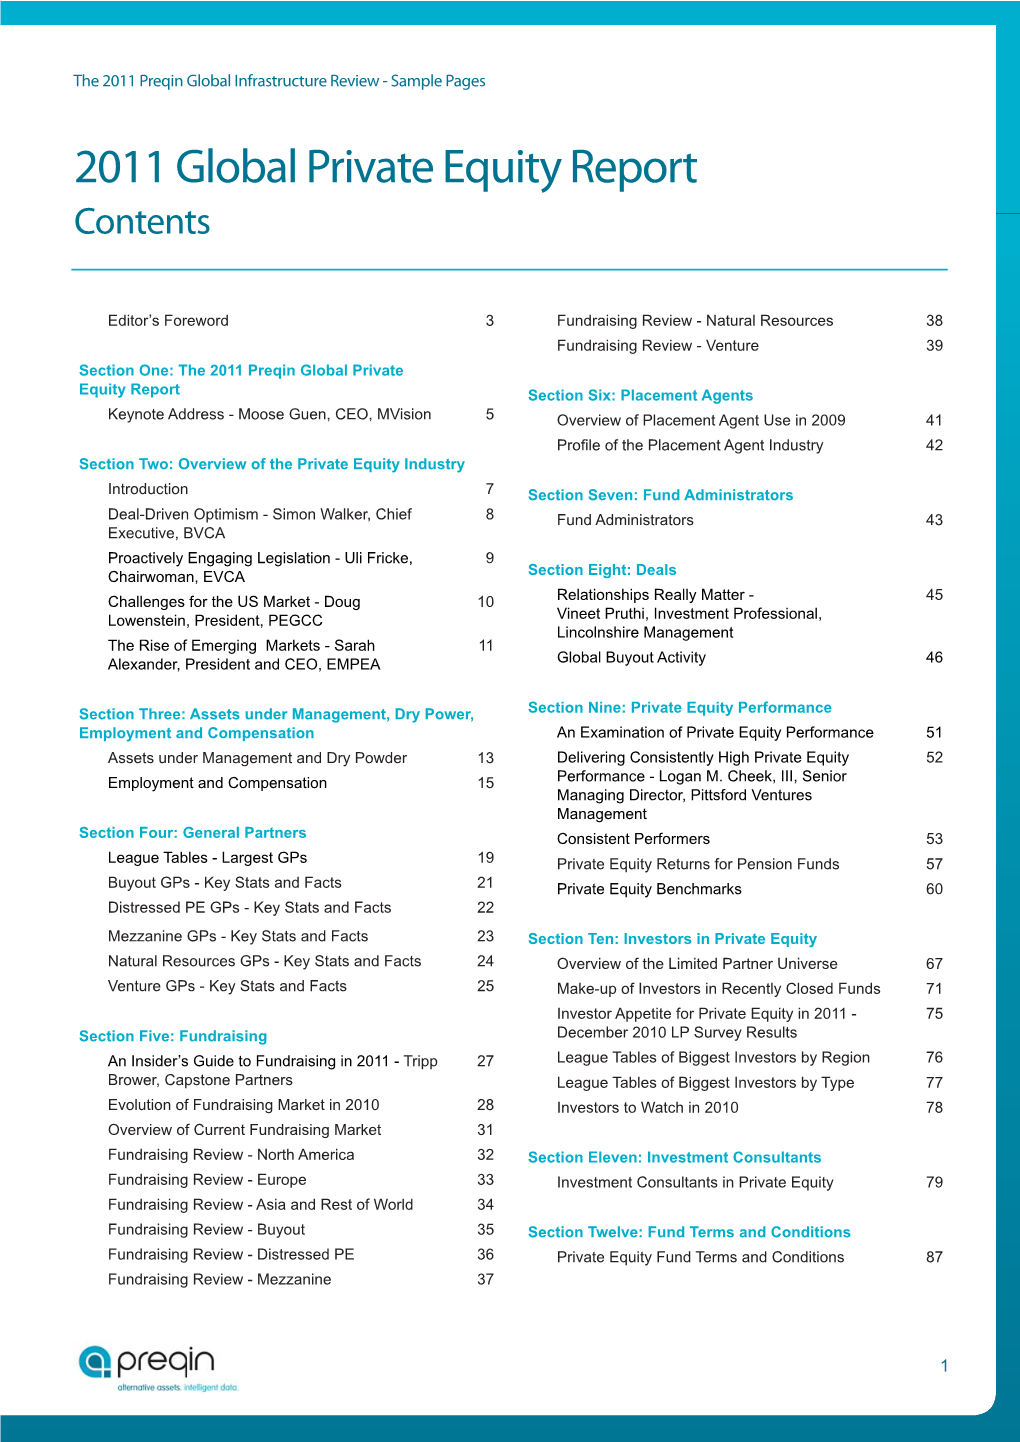 2011 Global Private Equity Report Contents